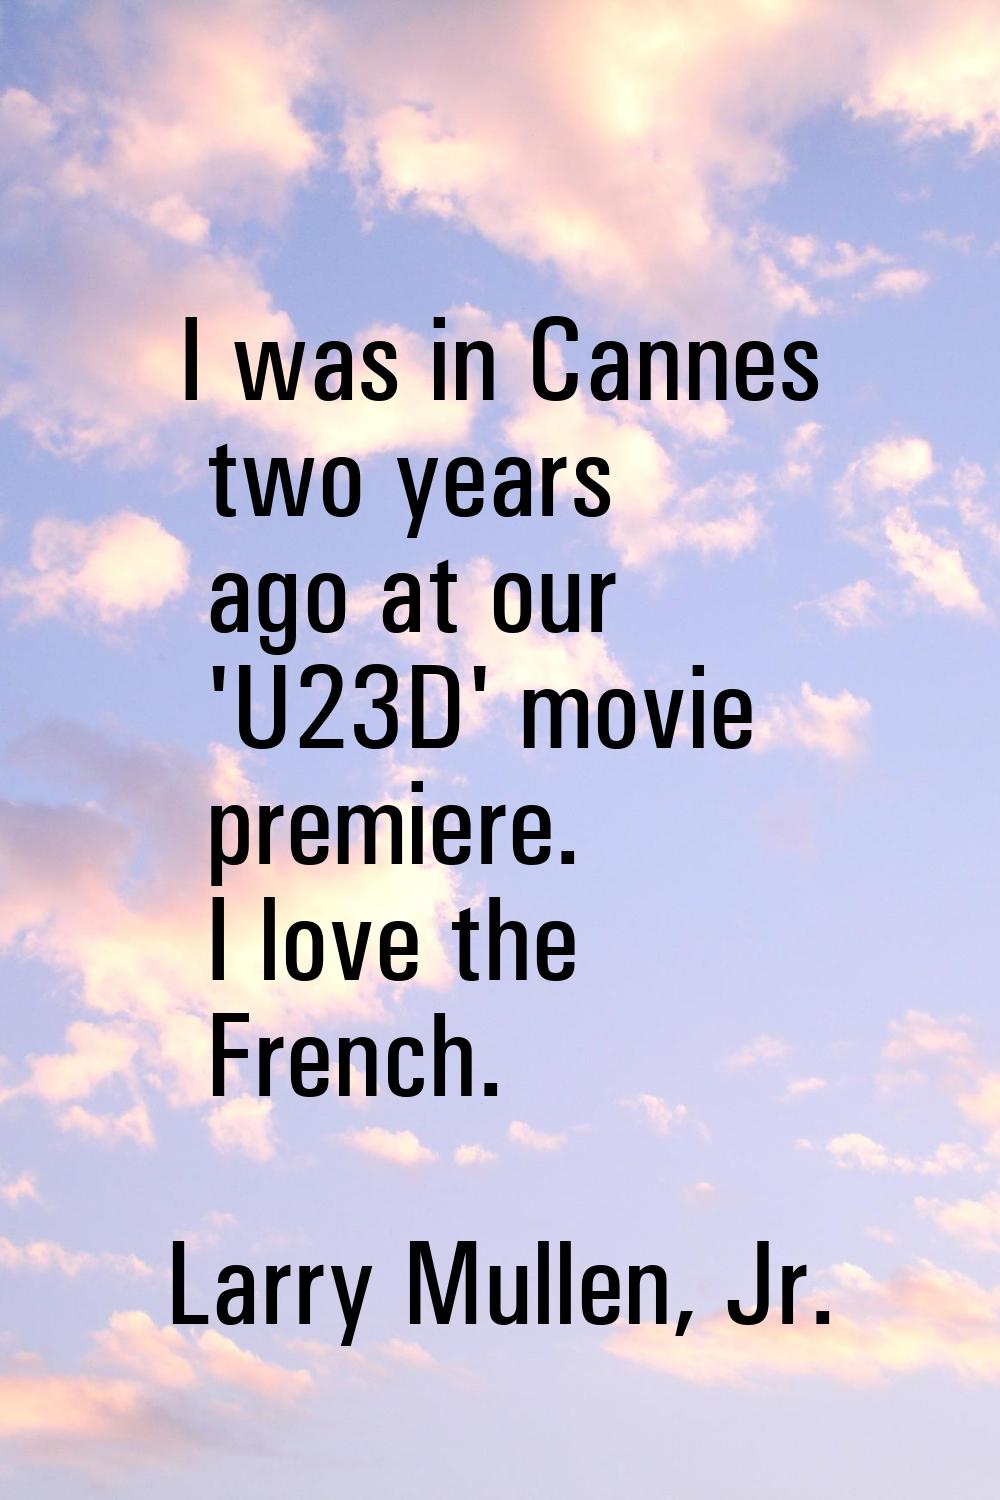 I was in Cannes two years ago at our 'U23D' movie premiere. I love the French.